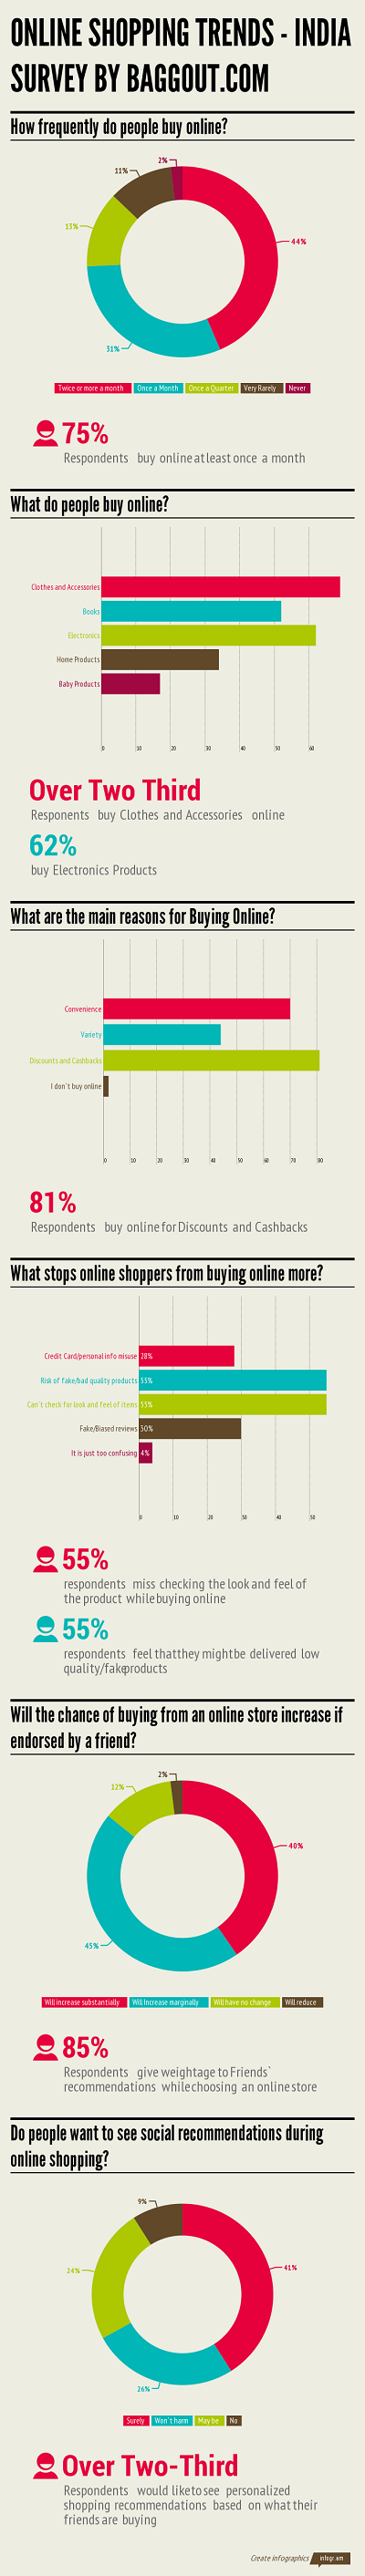 Trends in Online Shopping